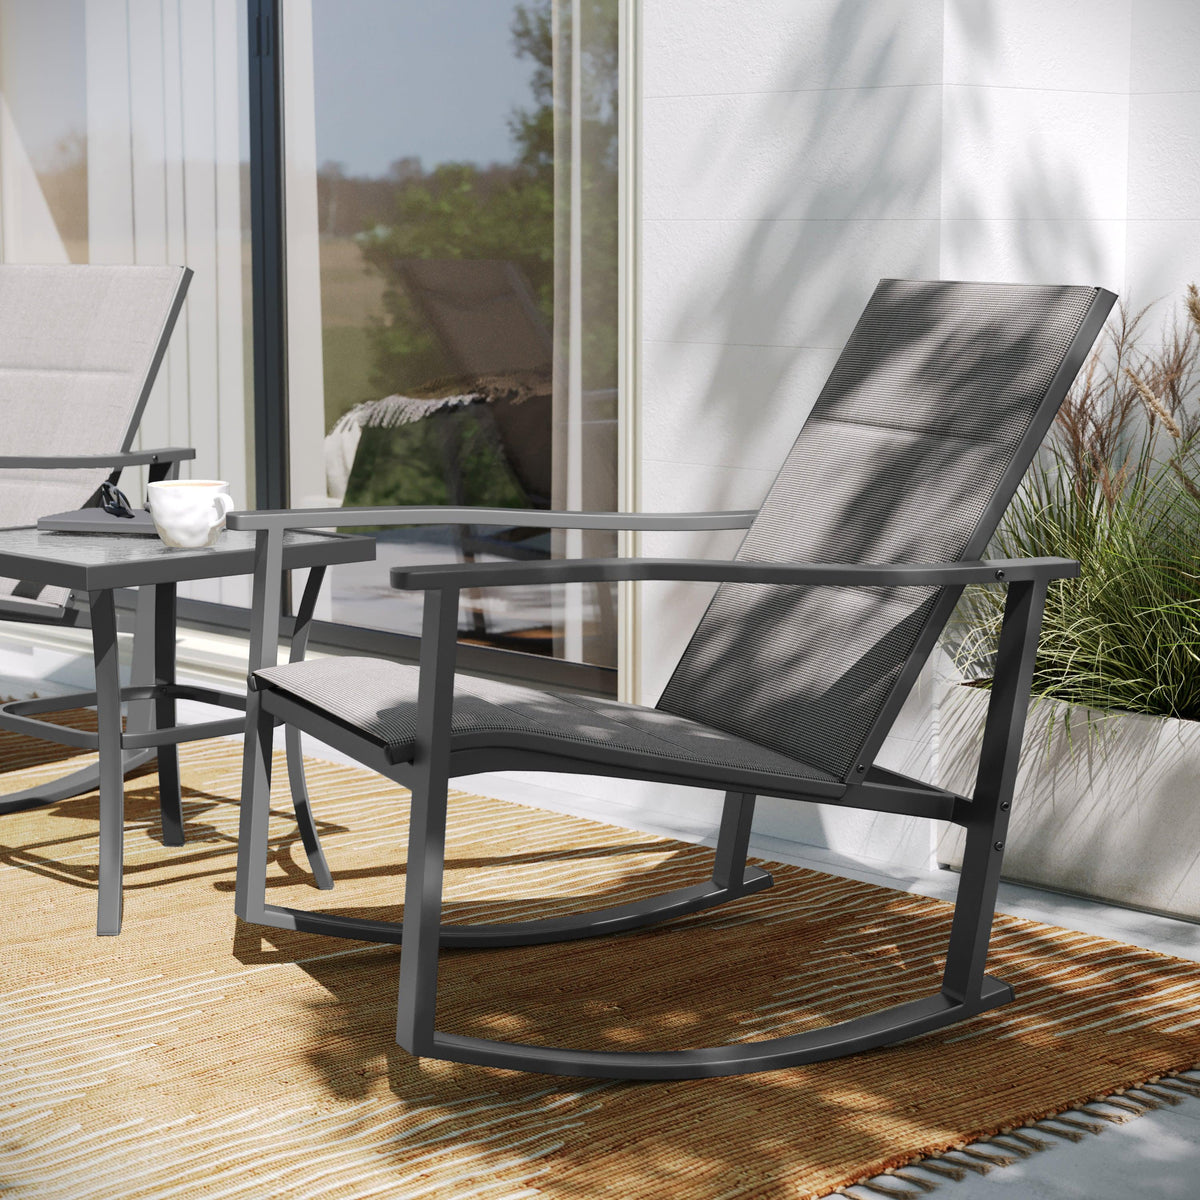 Gray |#| 3 Piece All-Weather Rocking Chairs and Glass Top Table Bistro Set - Gray/Black